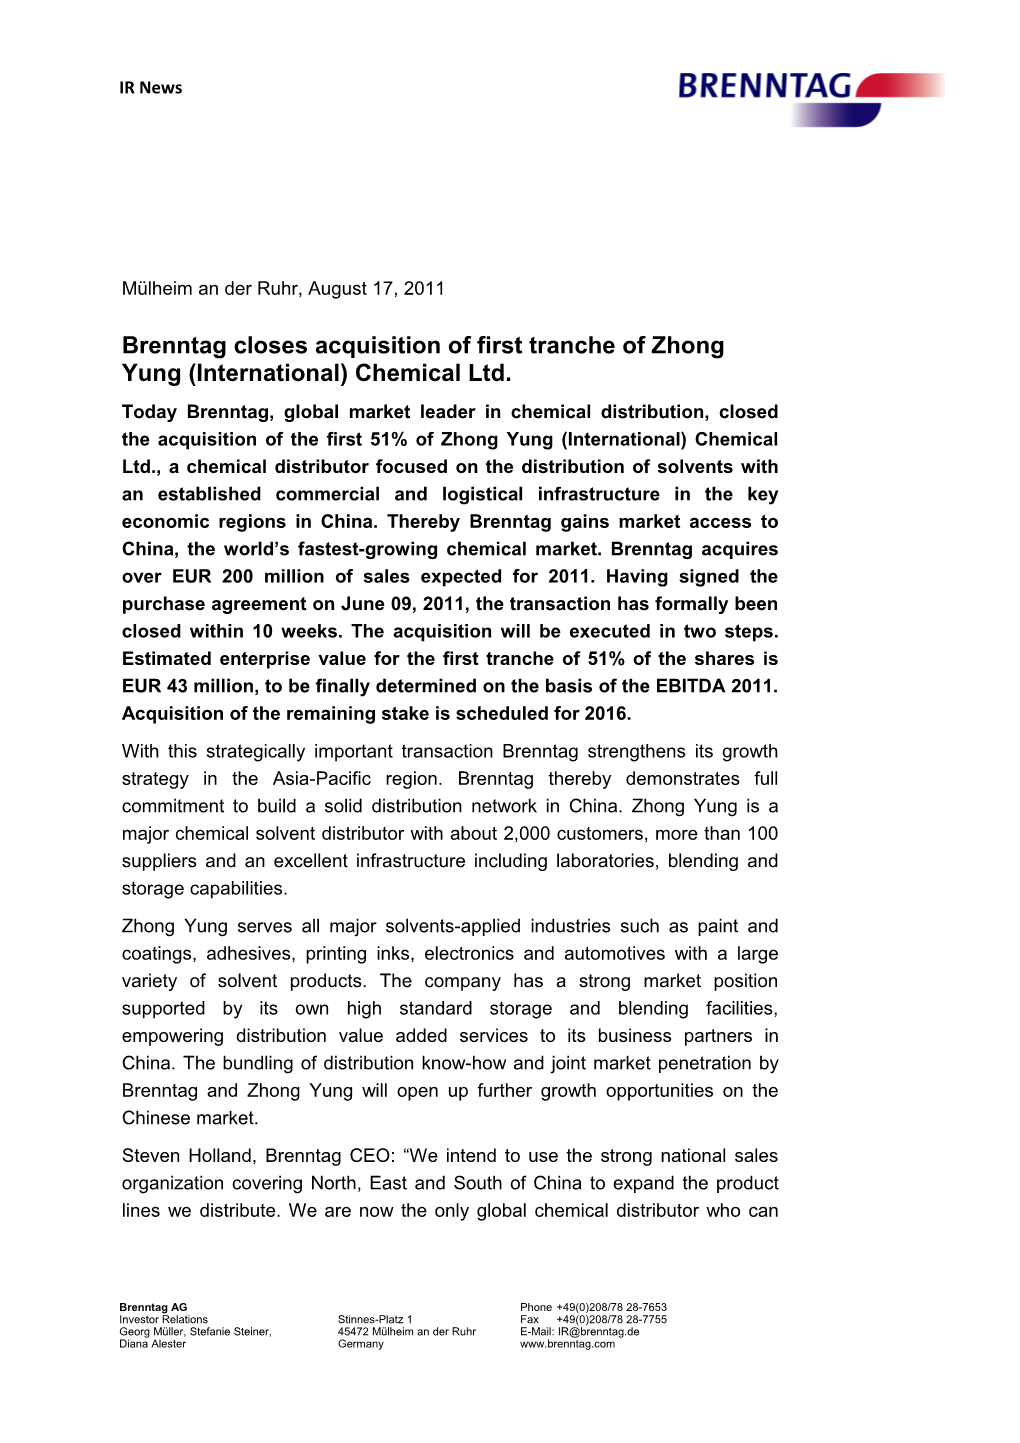 Brenntagcloses Acquisition of First Tranche of Zhong Yung (International) Chemical Ltd